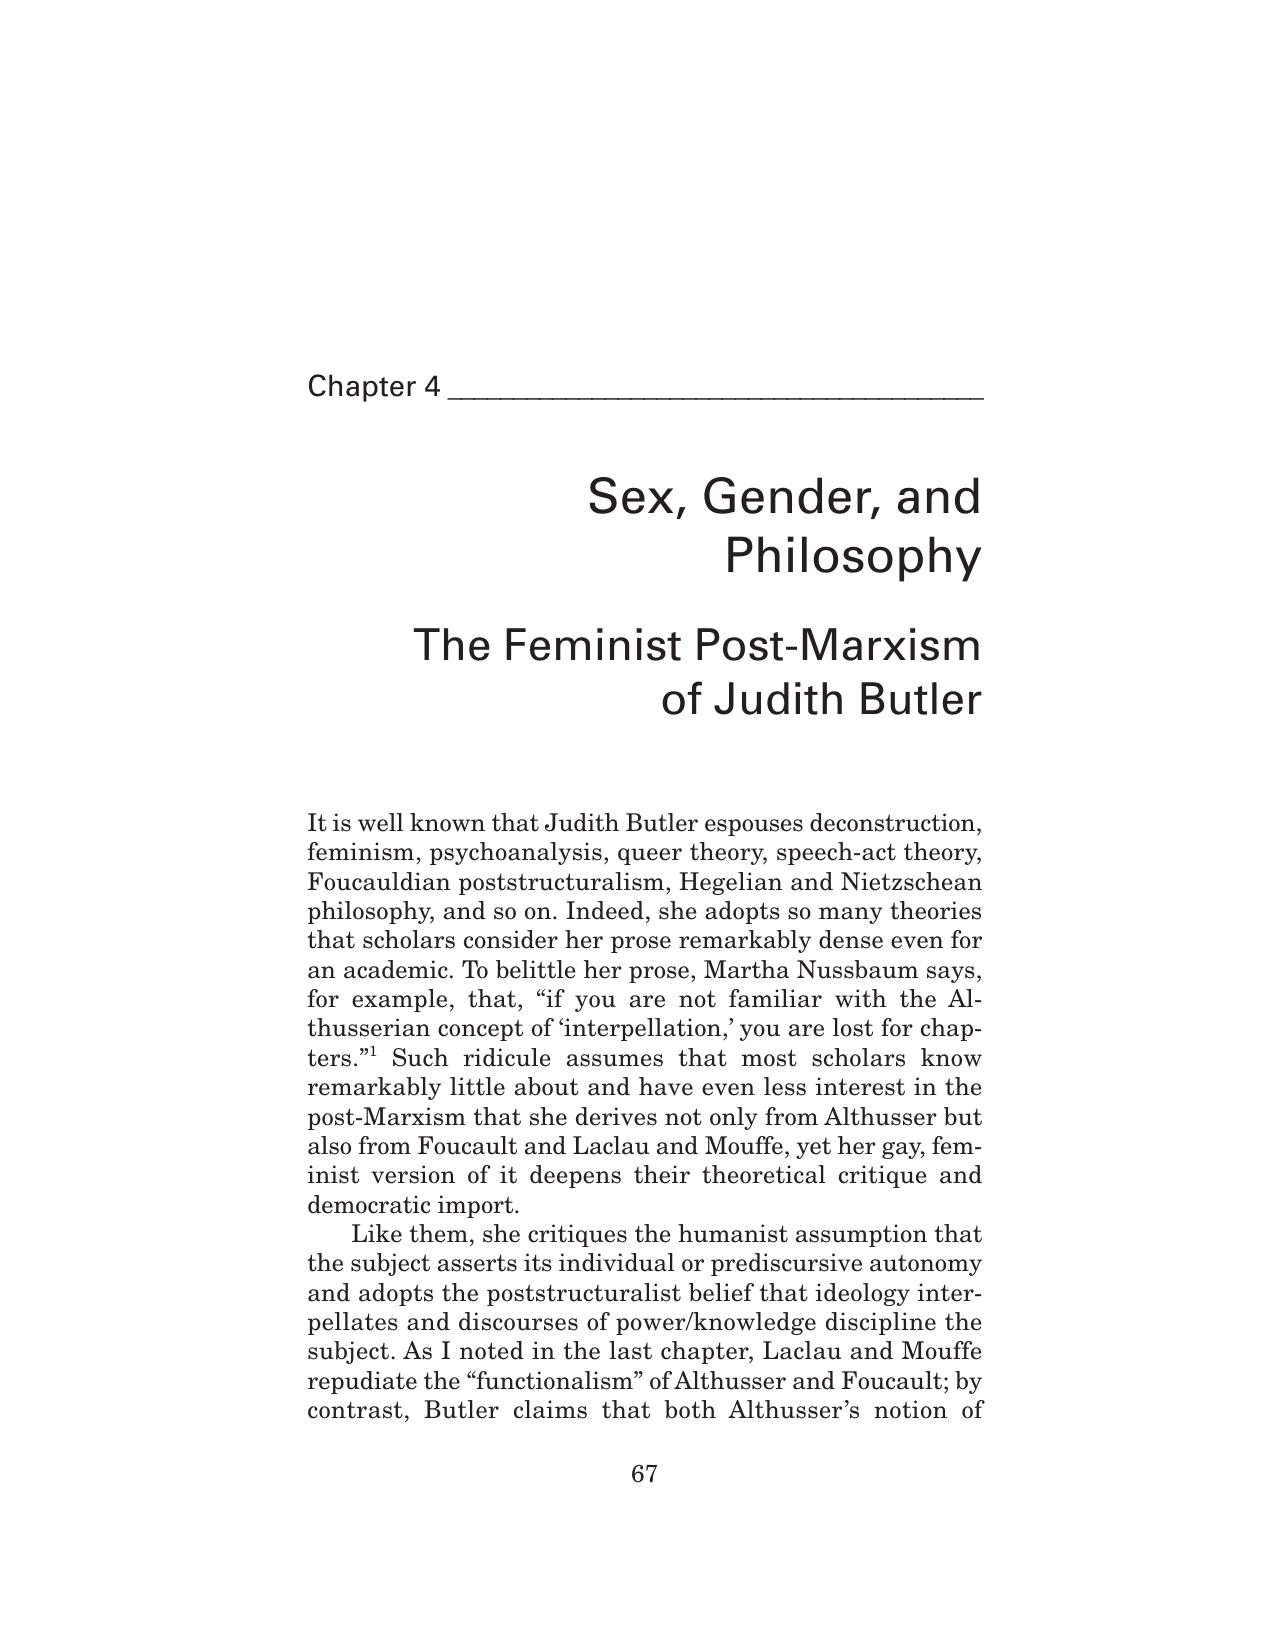 Post-Marxist Theory - Sex, Gender, and Philosophy - The Feminist Post-Marxism of Judith Butler - Chapter 4